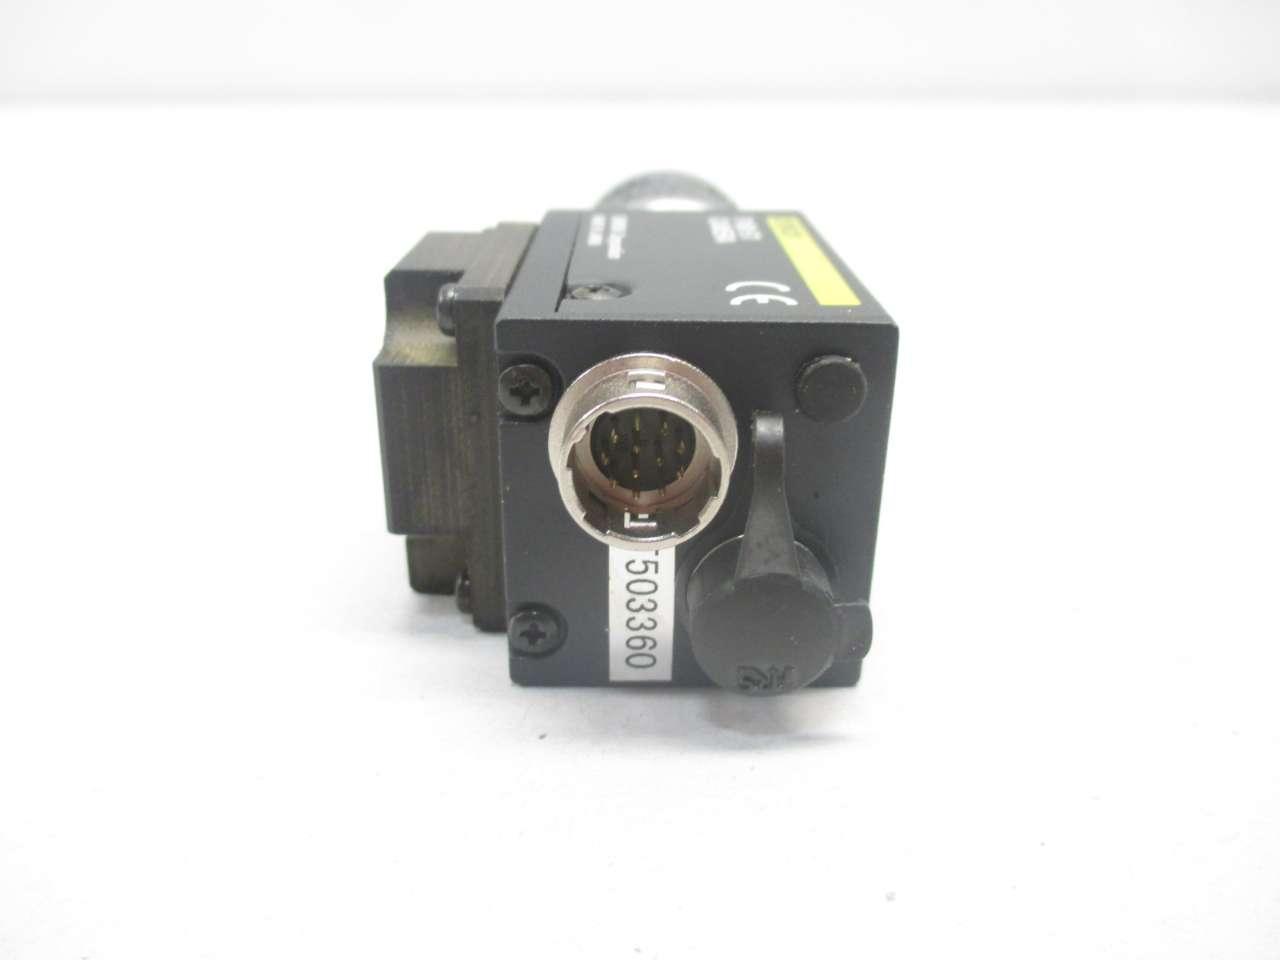 show original title Details about   OMRON f160-s1 Vision Camera 